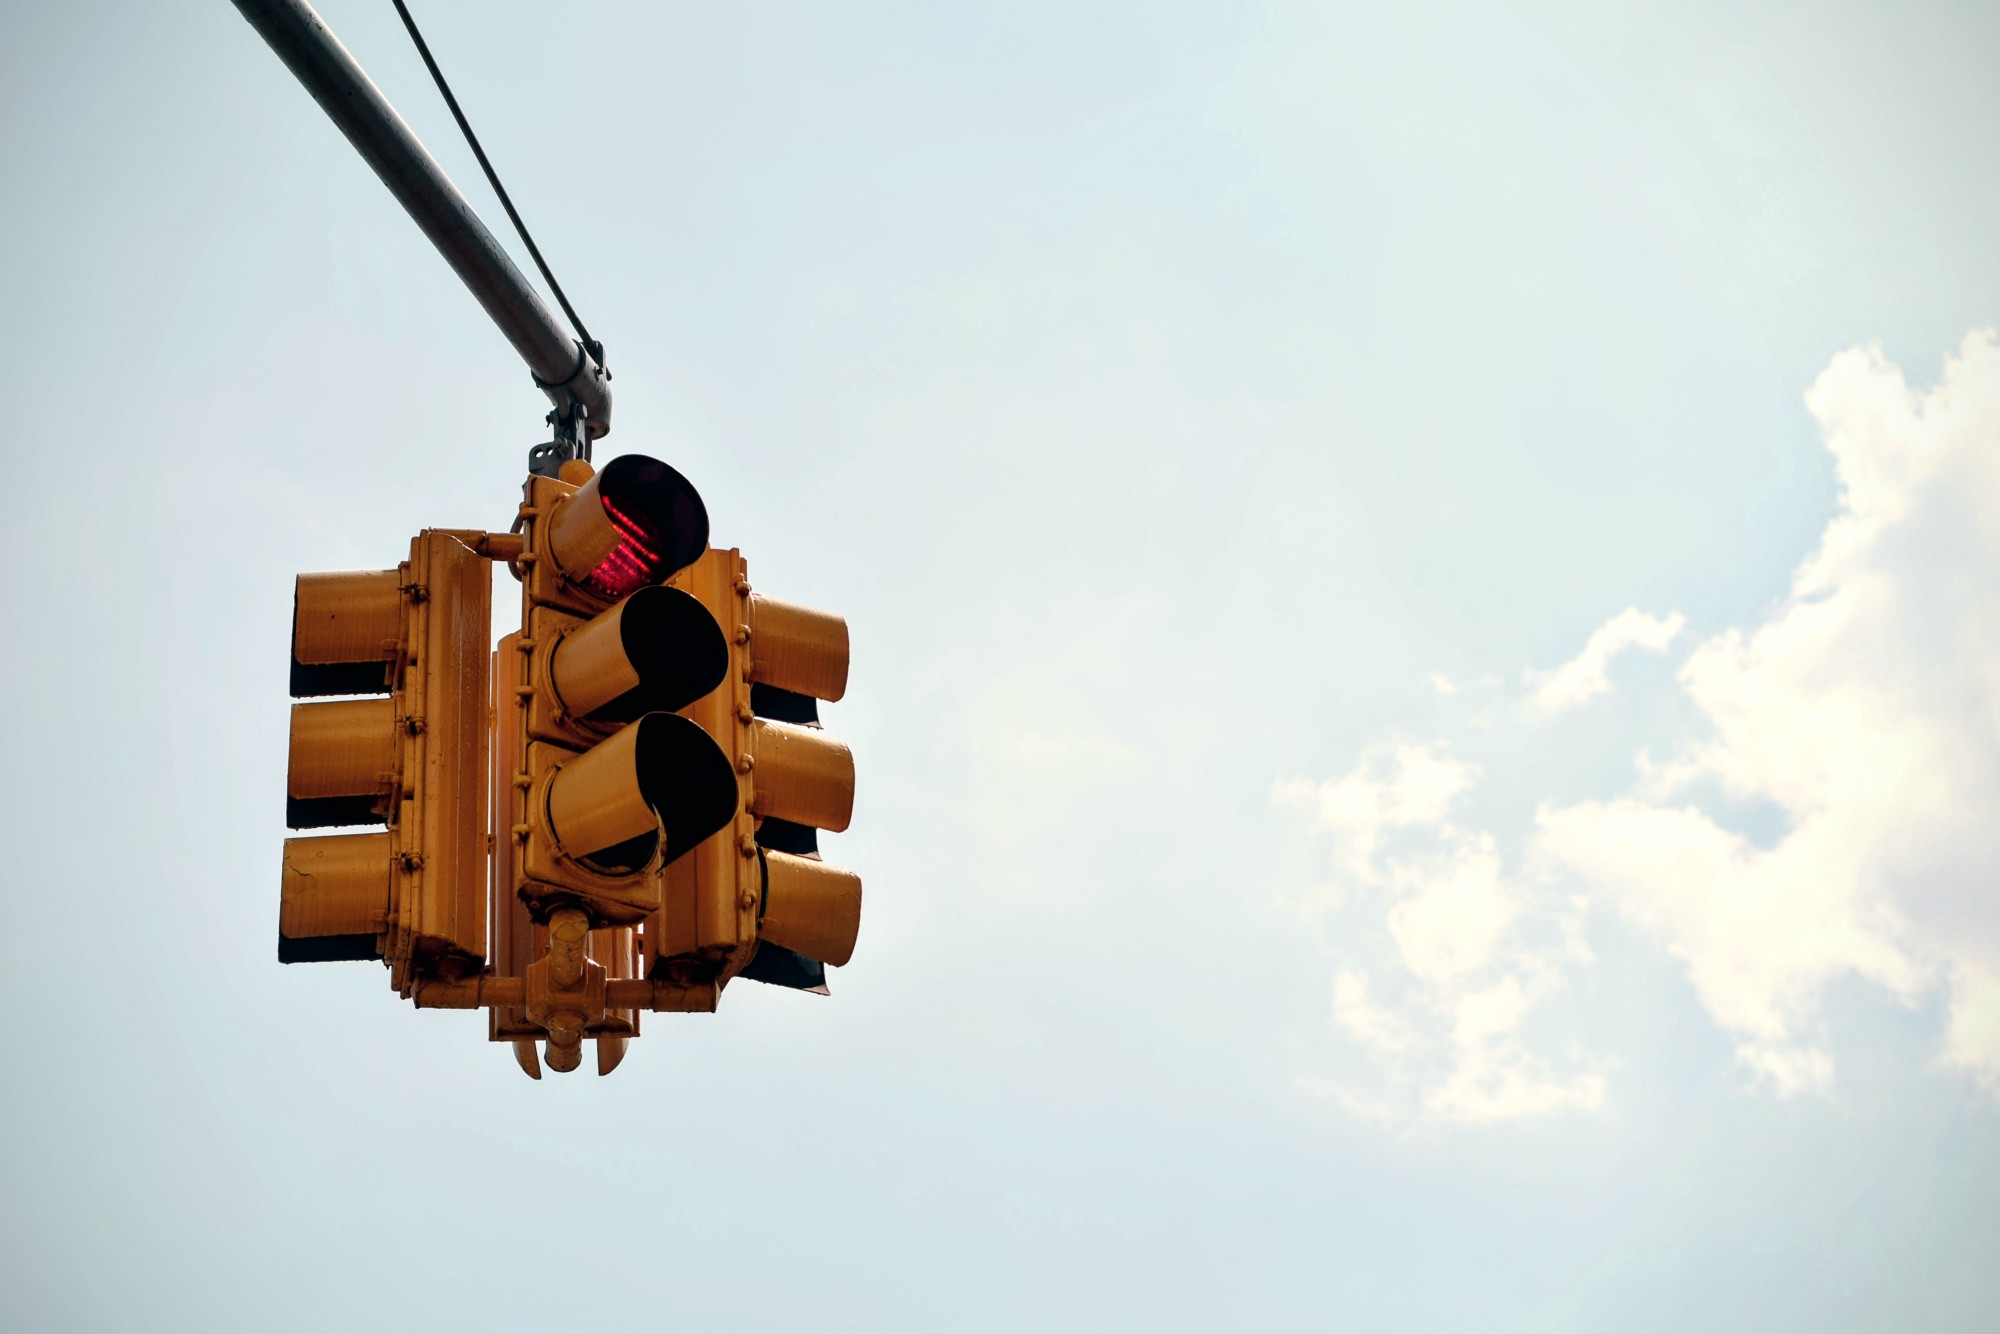 Recognizing Traffic Lights With Deep Learning – freeCodeCamp